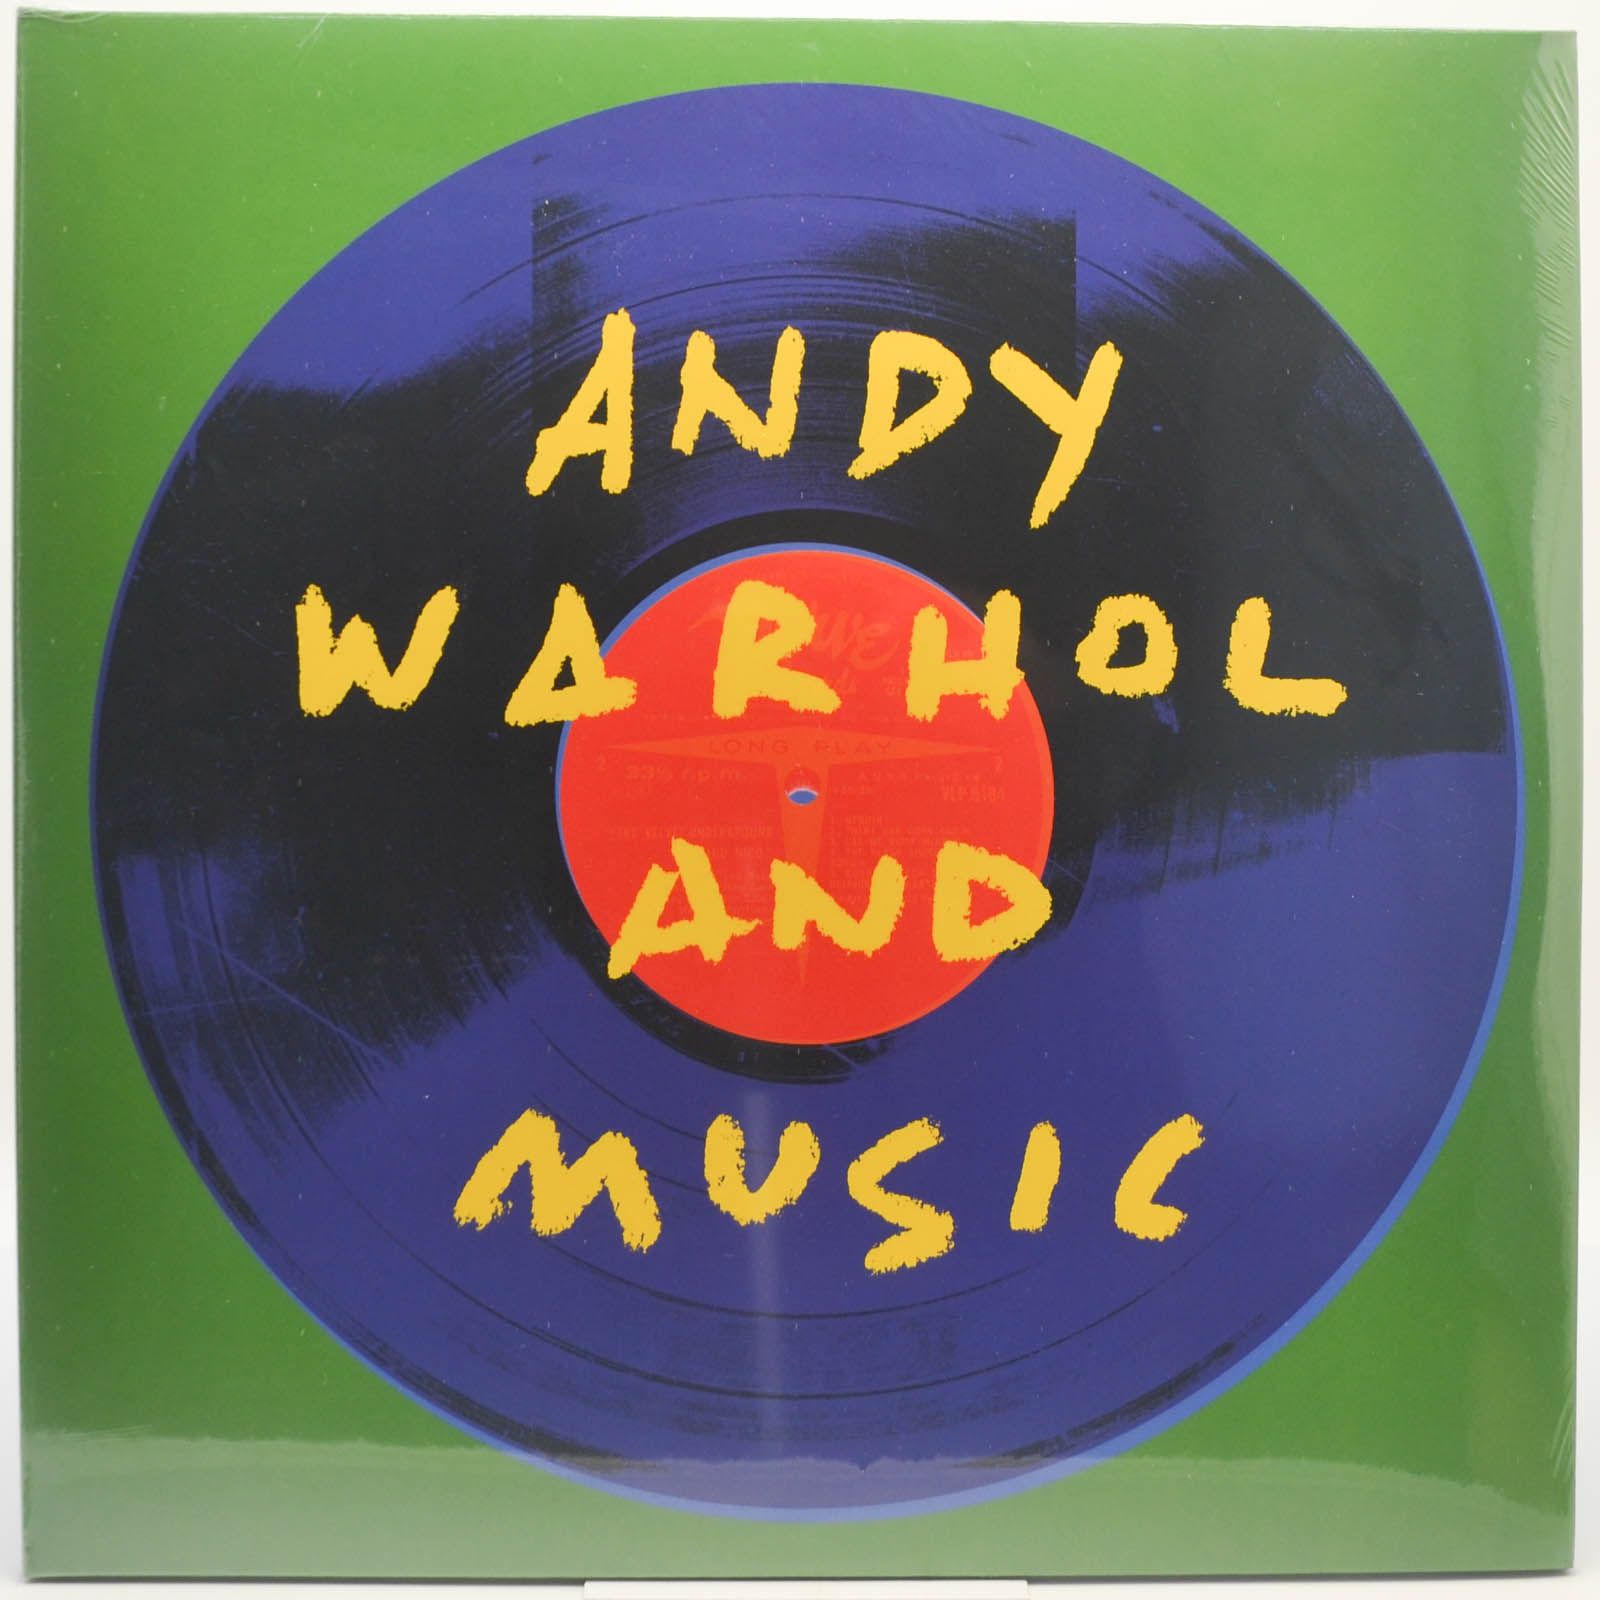 Various — Andy Warhol and Music (2LP), 2019